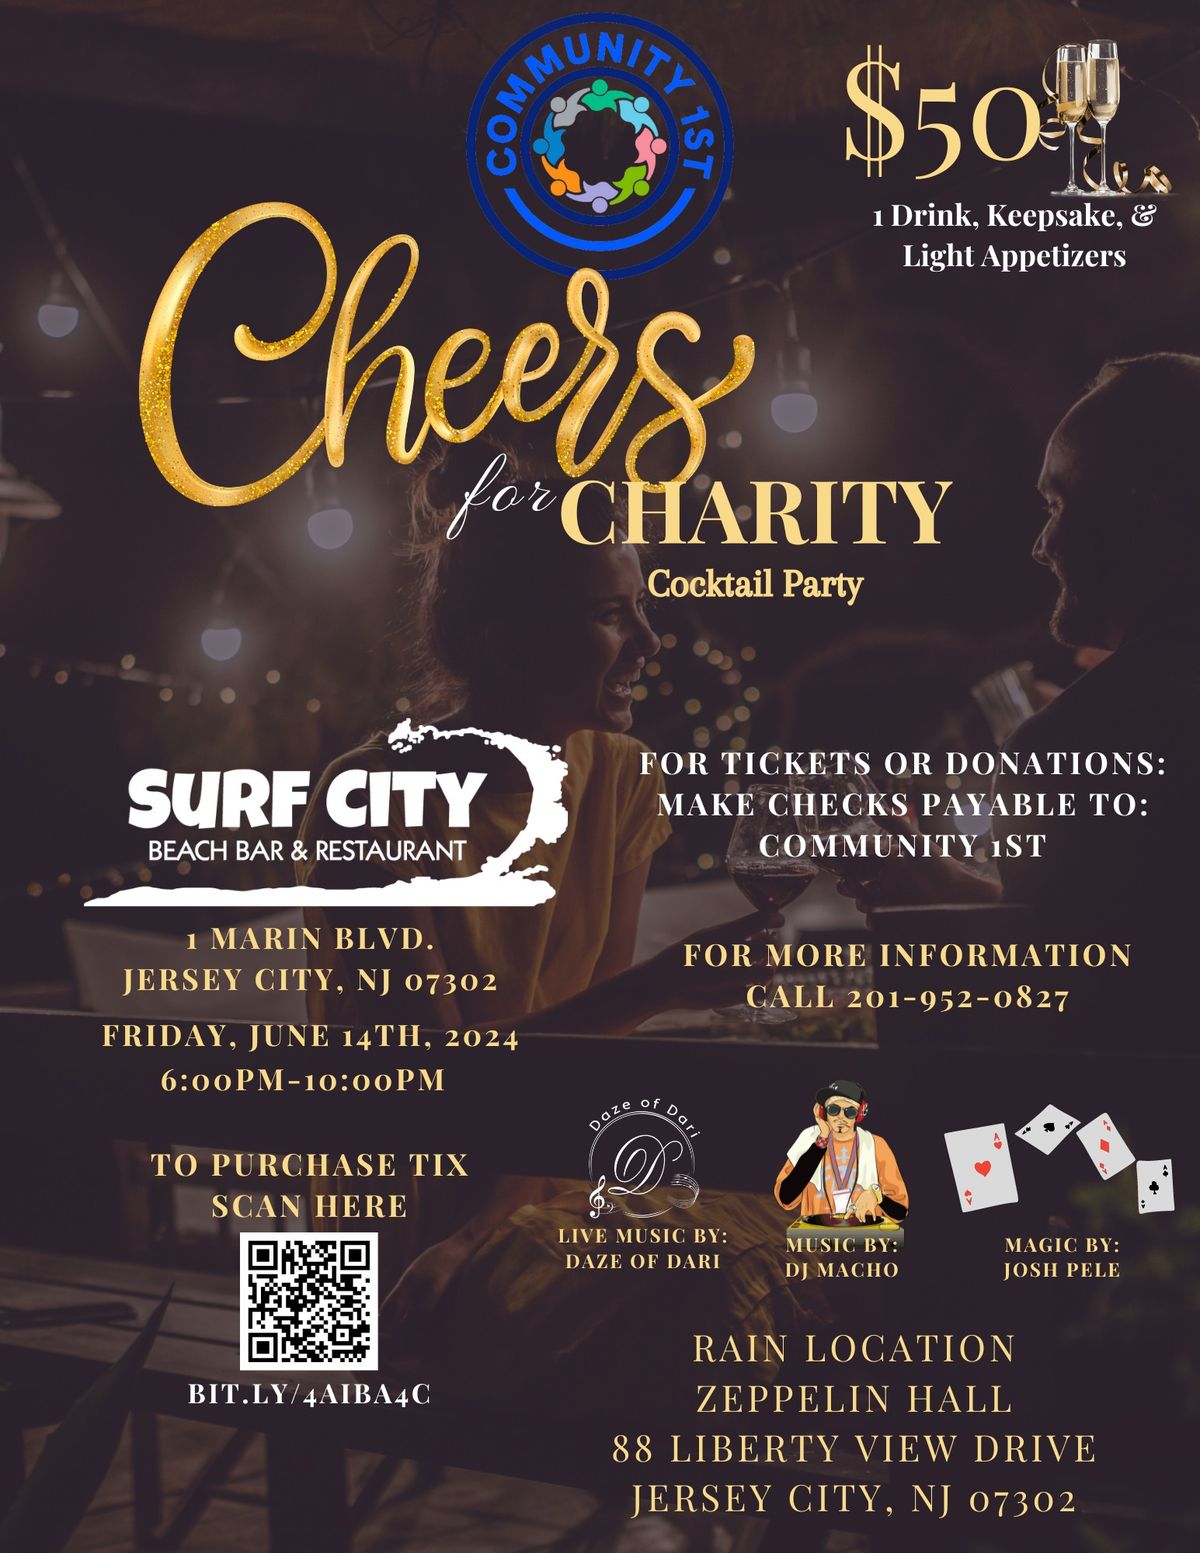 Community 1st presents Cheer for Charity Cocktail Party